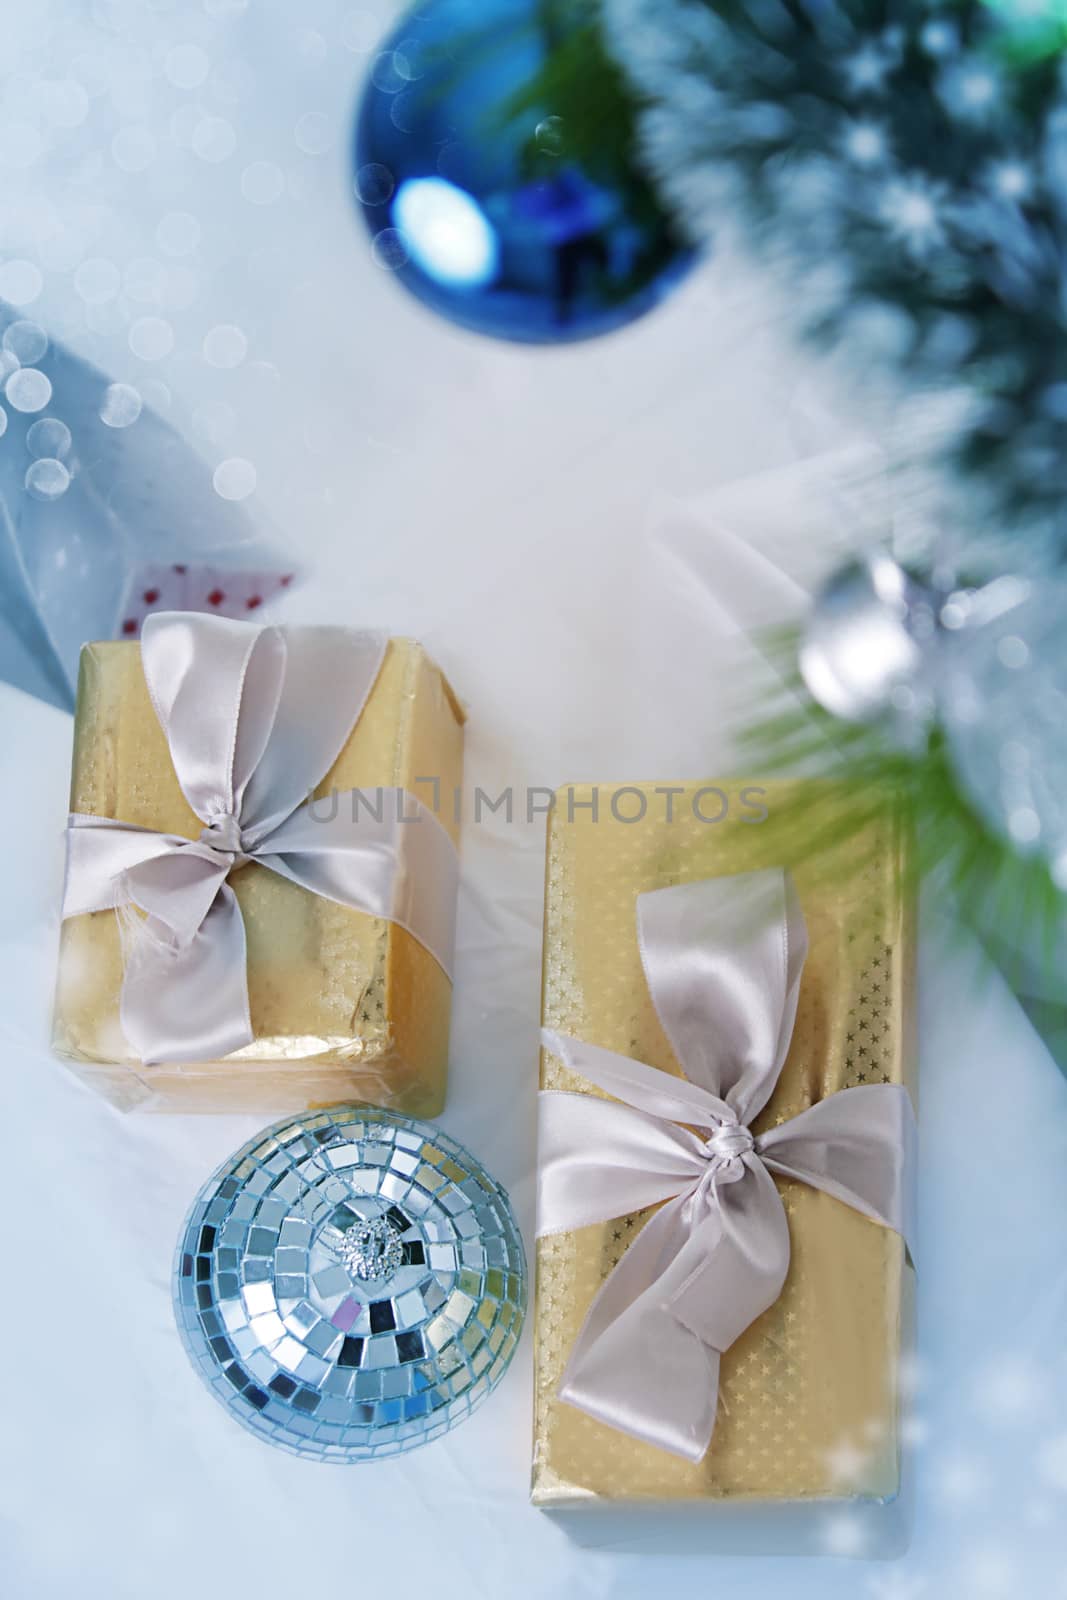 Decor with blue balls and silver gifts by Angel_a